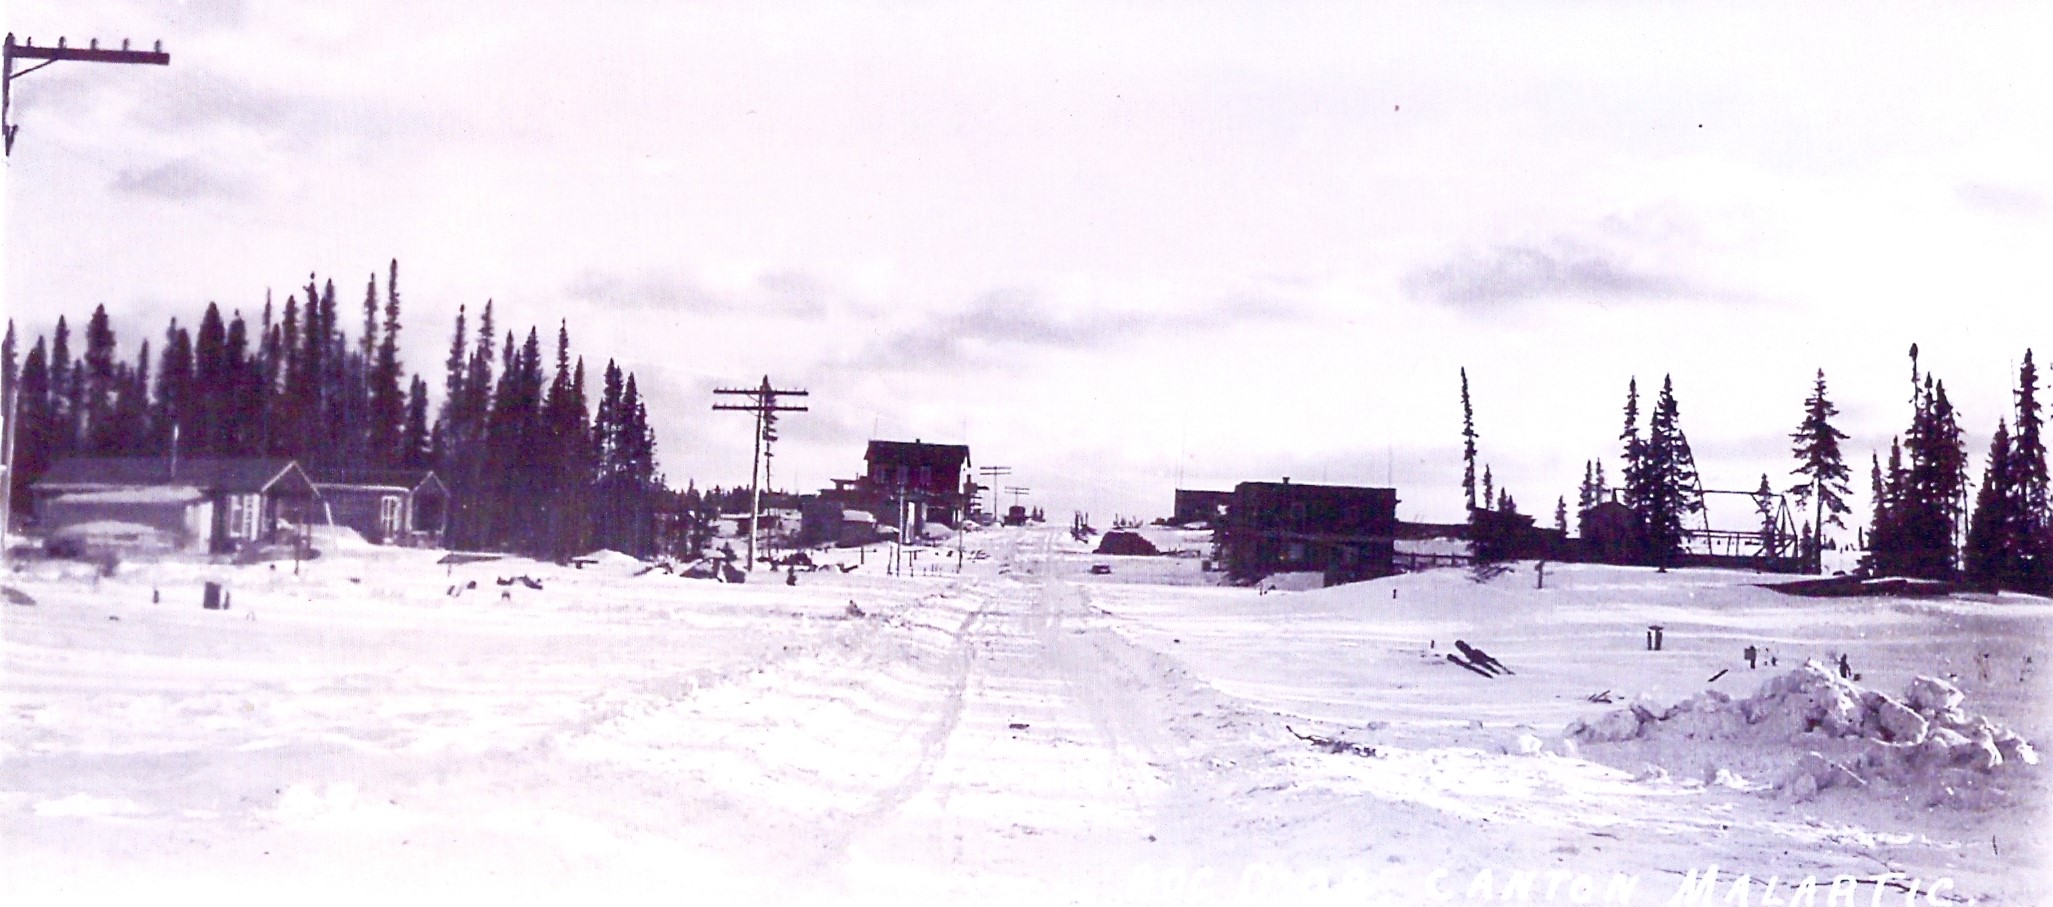 Black and white photograph of a snowy hamlet with a road down the centre. Log and plank buildings and telephone poles are visible.